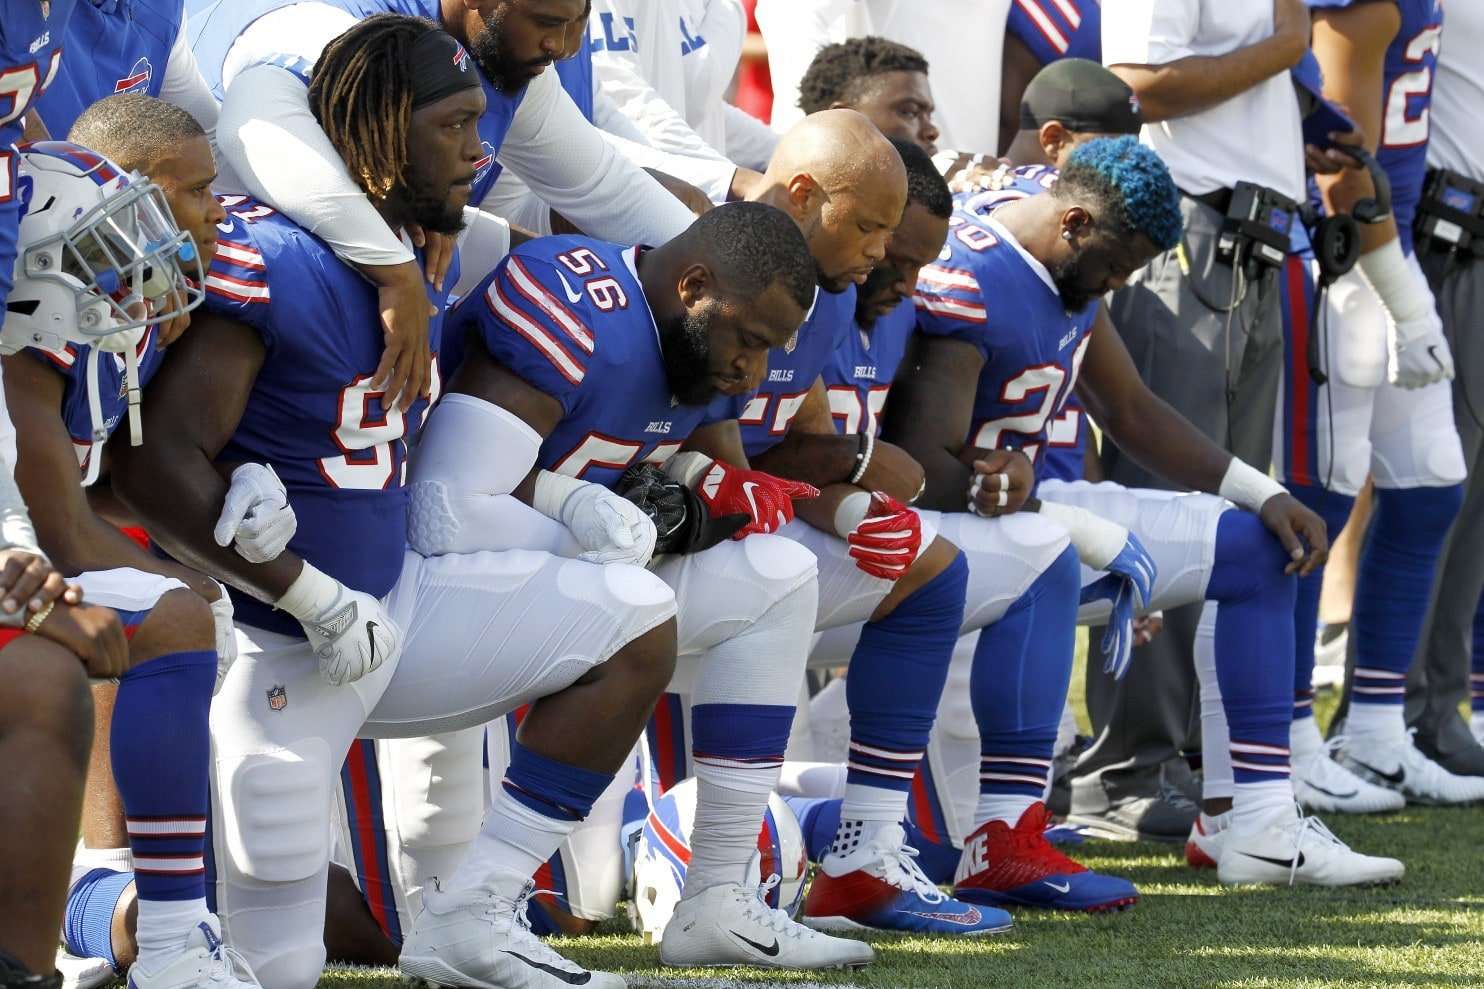 image for Louisiana high school will kick students off team if they don’t stand for national anthem